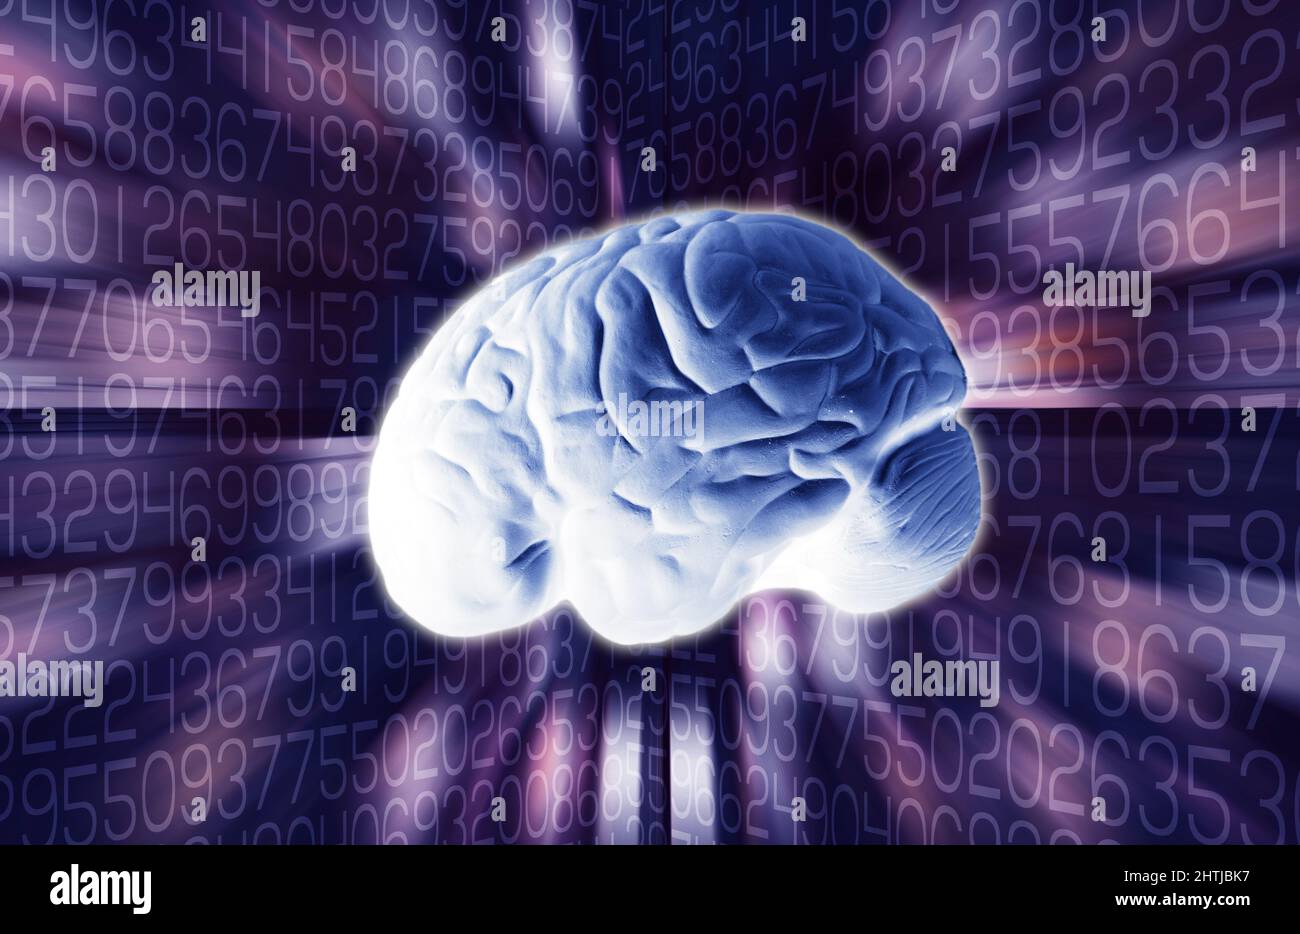 human brain and numbers, cognitive and logical brain function Stock Photo